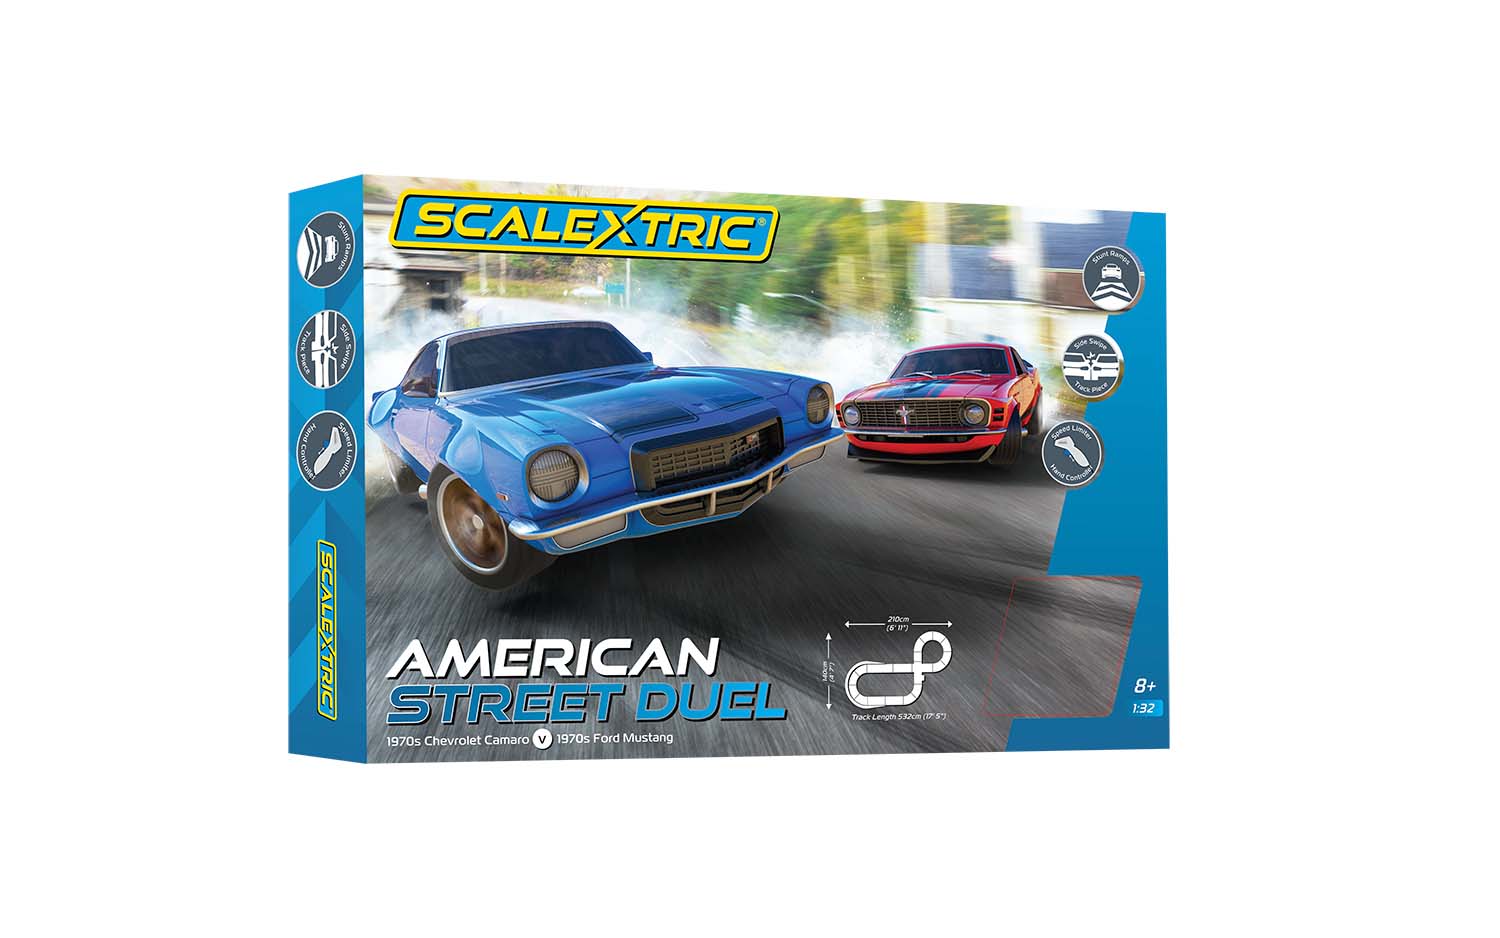 C1429T Scalextric American Street Dual (1970s Chevrolet Camaro Vs 1970s Ford Mustang)